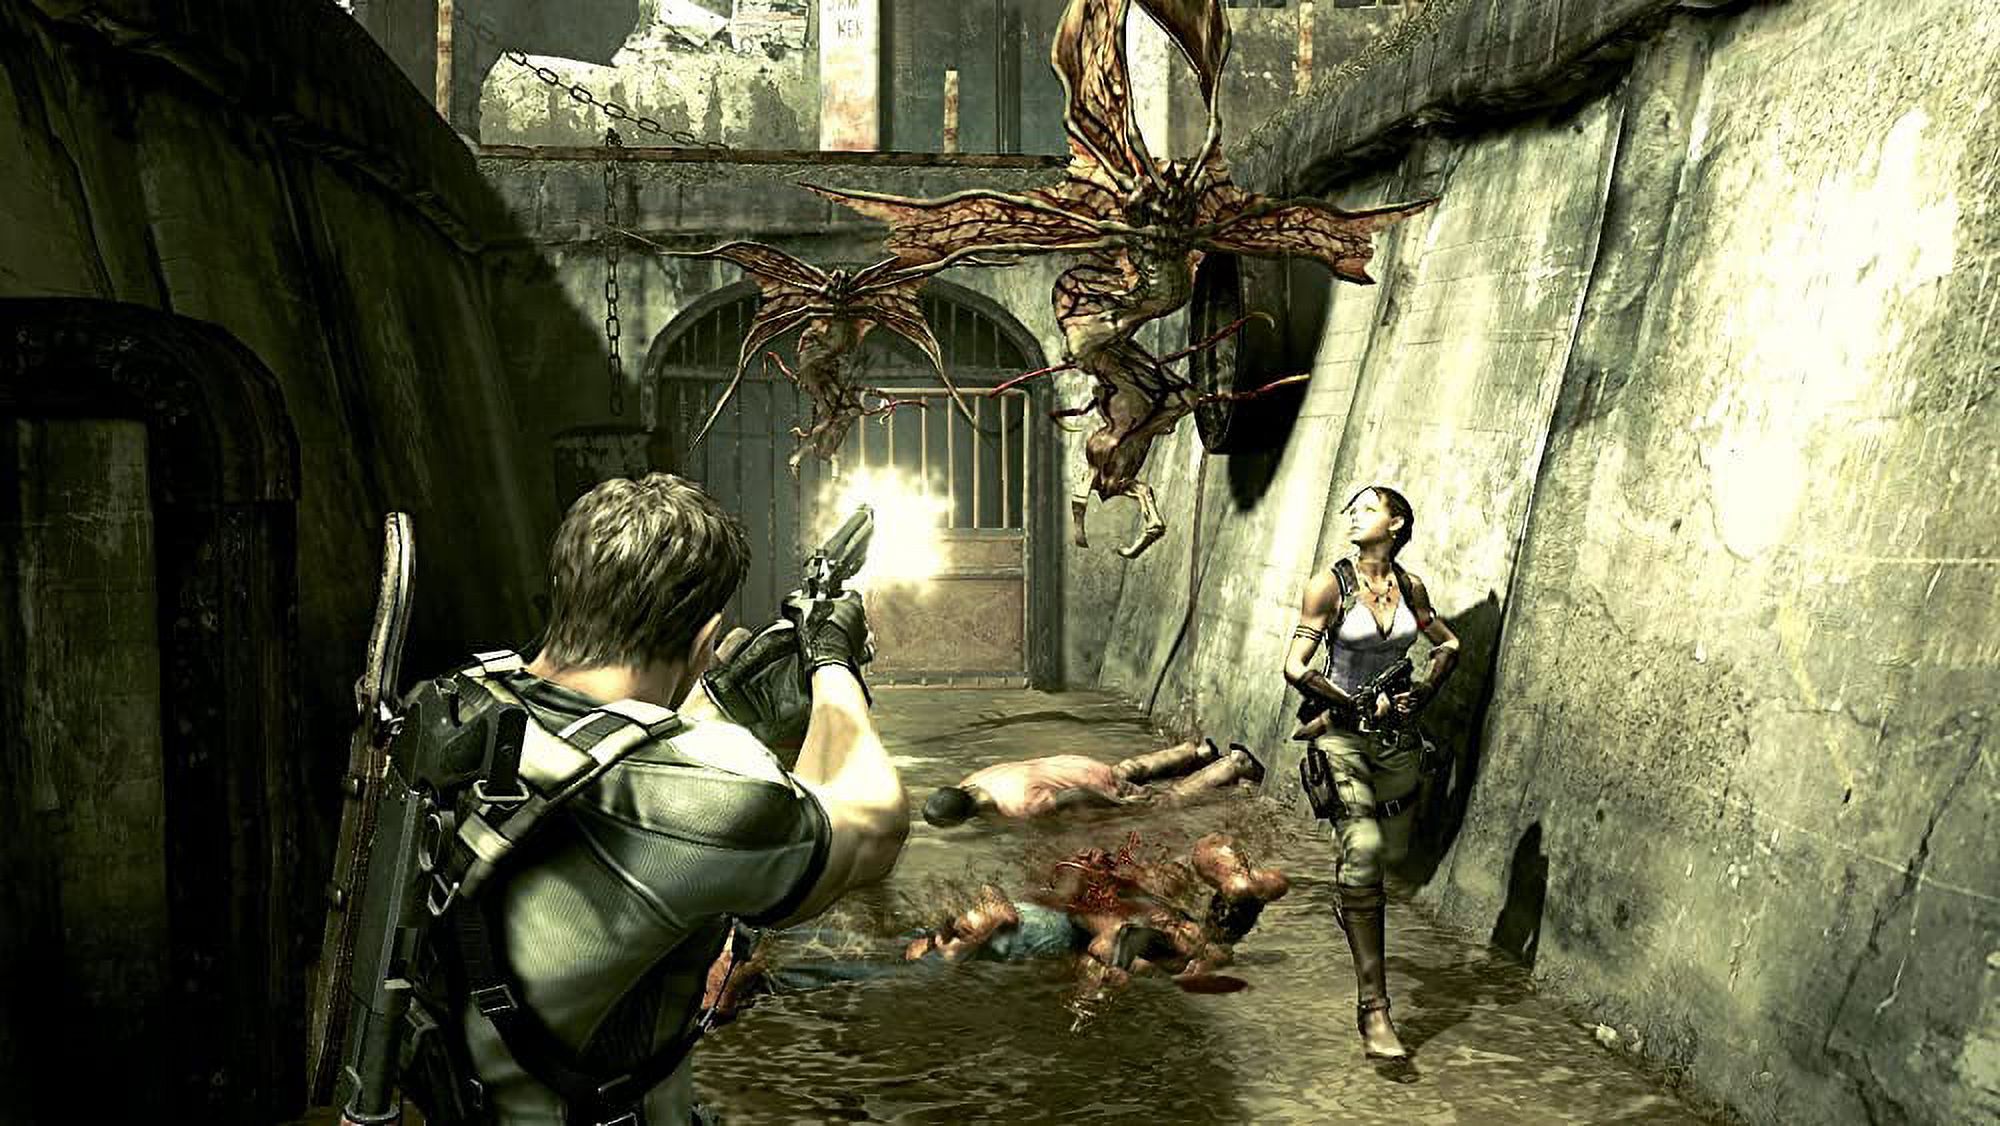 Resident Evil 5 HD, Capcom, Xbox One, [Physical Edition], 55019 - image 4 of 7